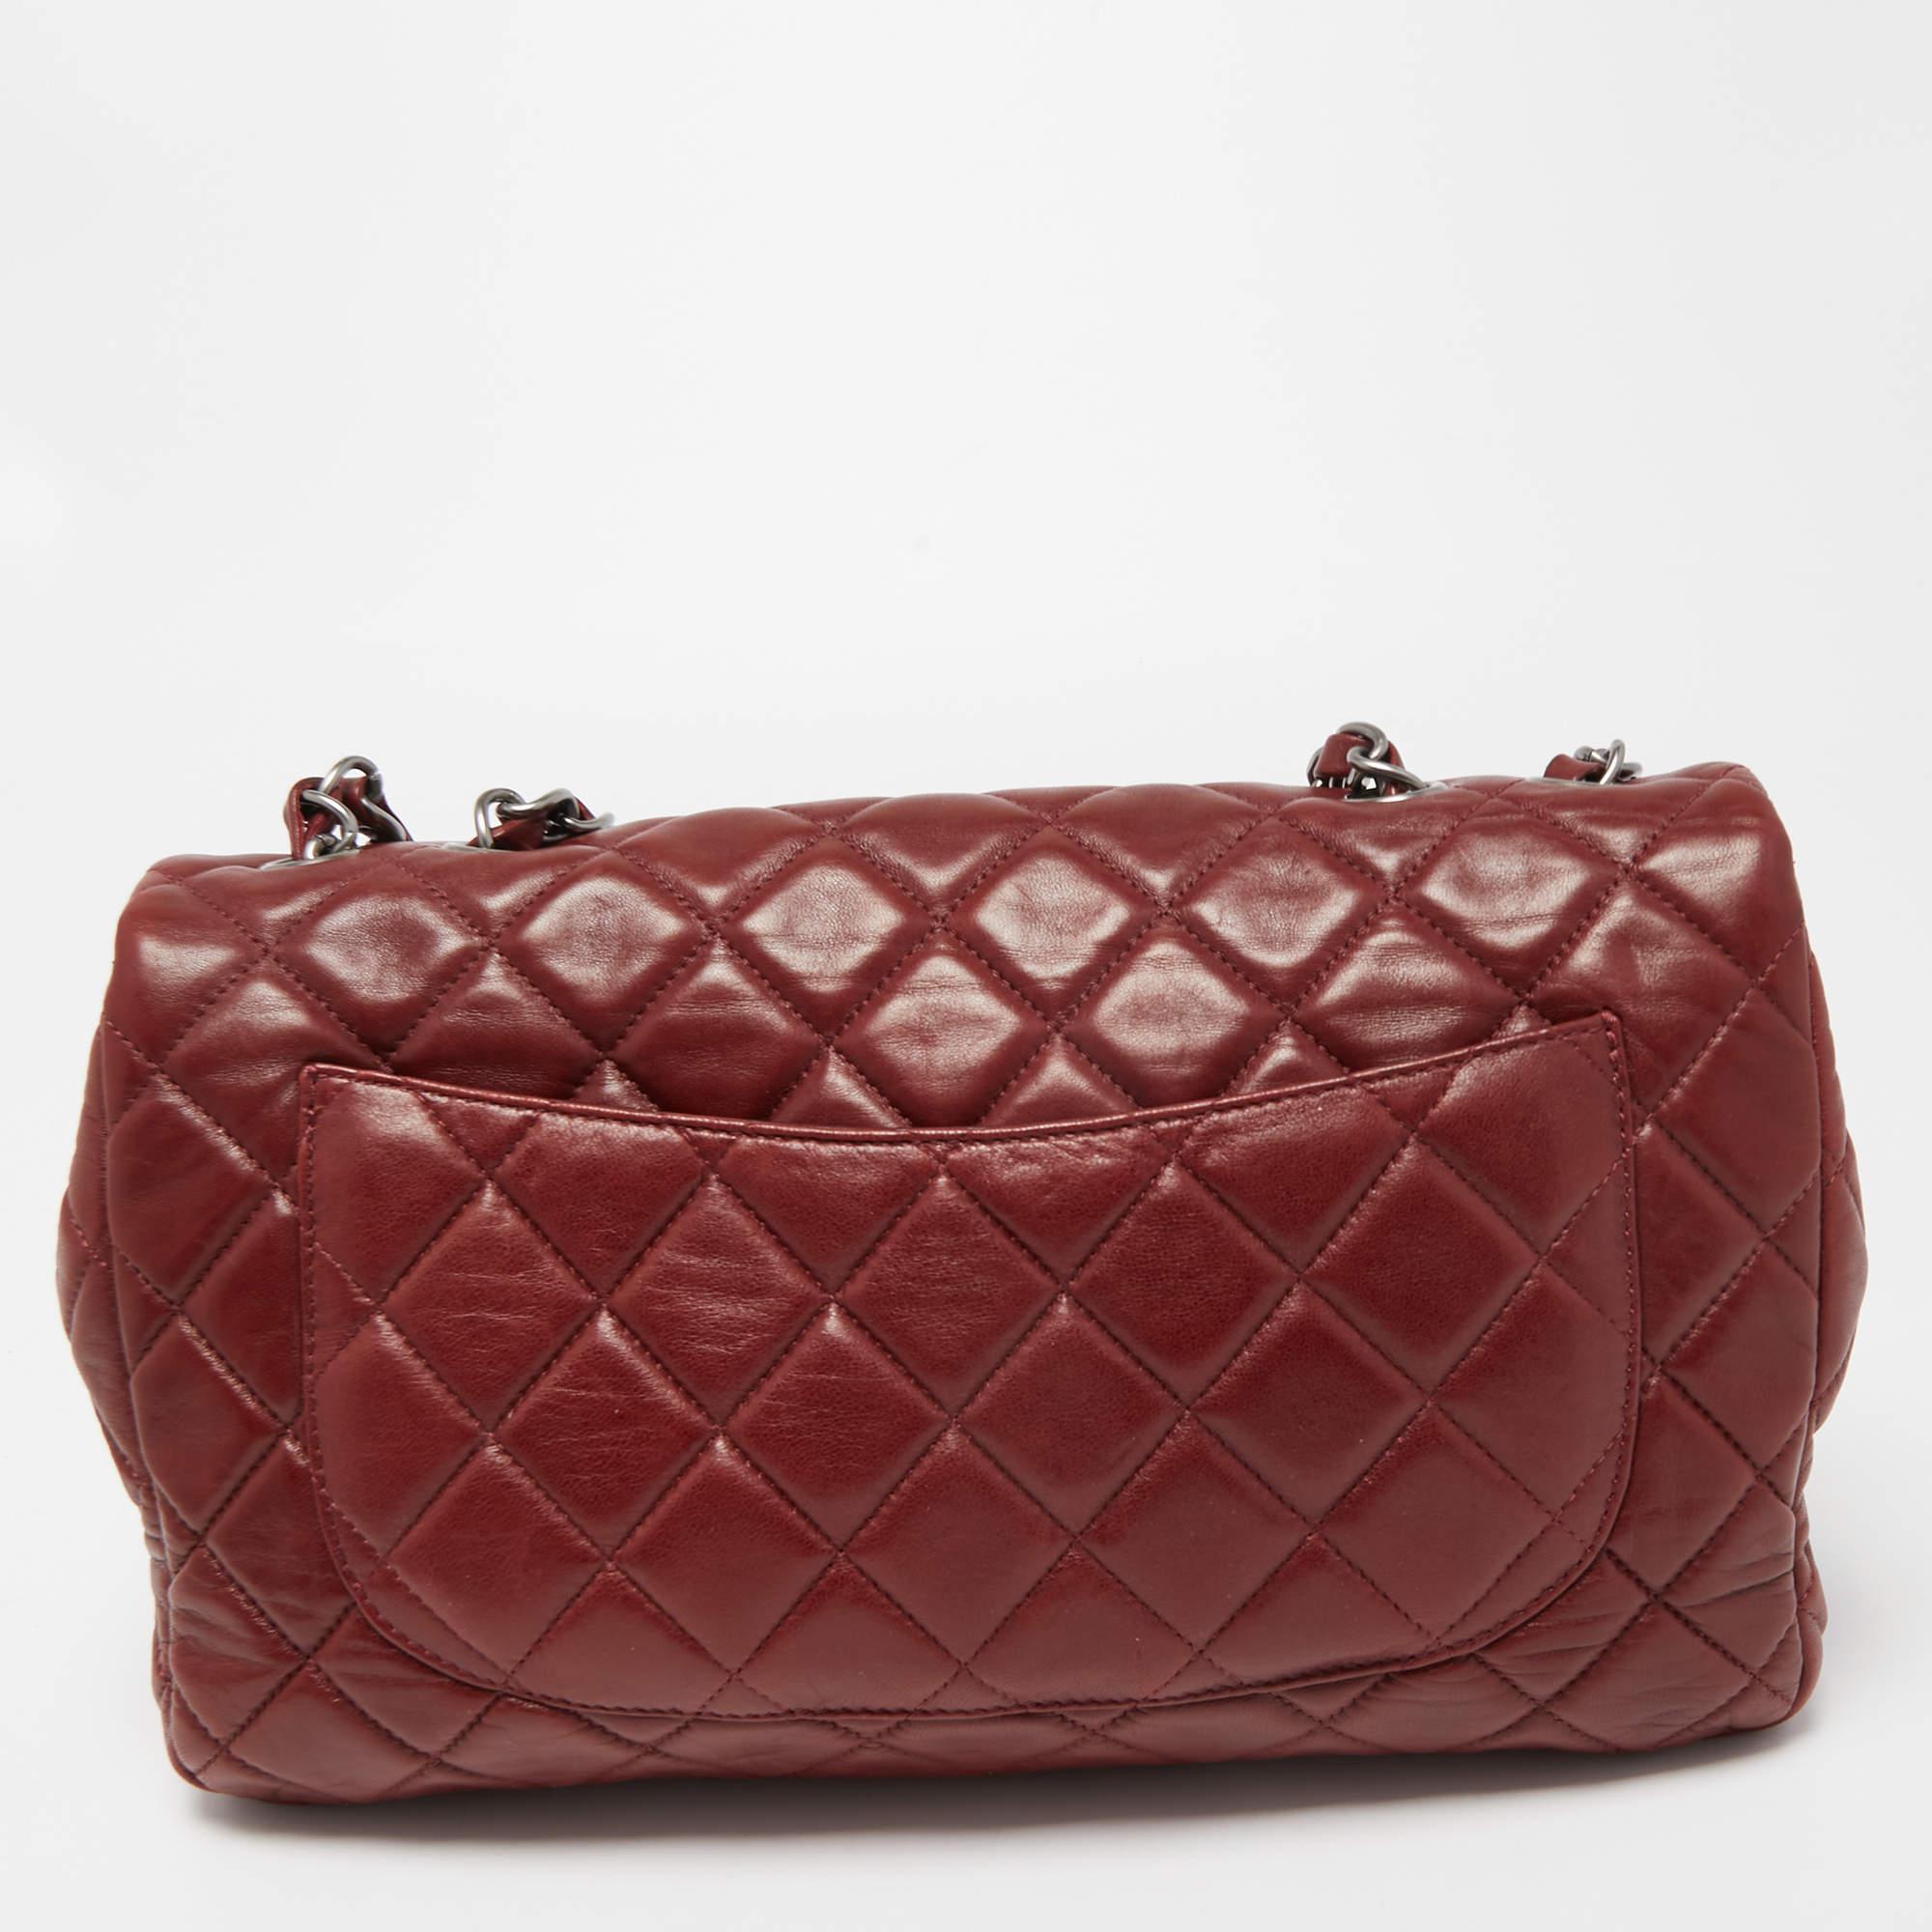 Chanel Red Quilted Leather Jumbo Classic Single Flap Bag In Good Condition For Sale In Dubai, Al Qouz 2